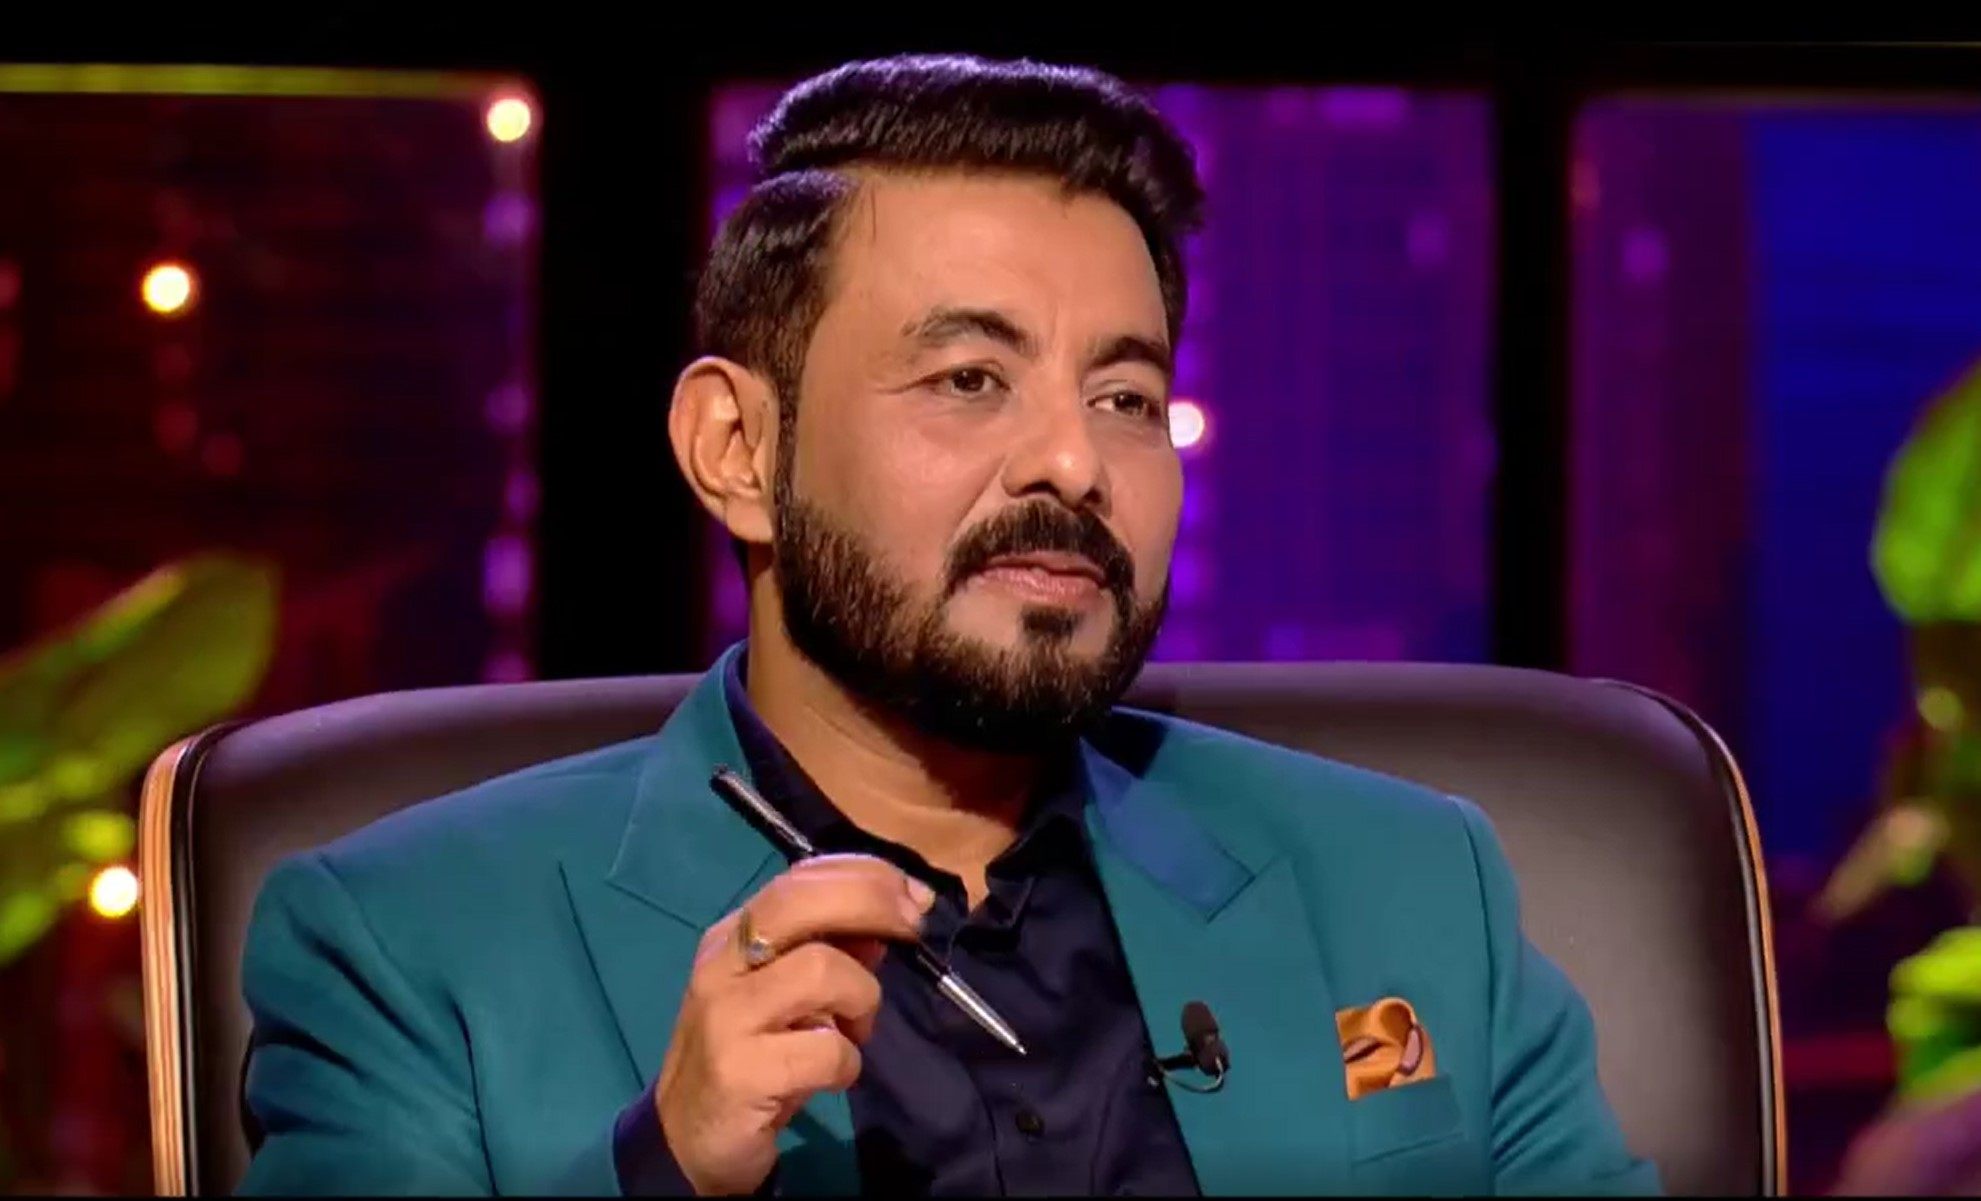 Meet Amit Jain, Shark Tank India season 2's new cast member: the  millionaire entrepreneur replaces Ashneer Grover on the hit reality TV  show, but what was his life like before the fame?